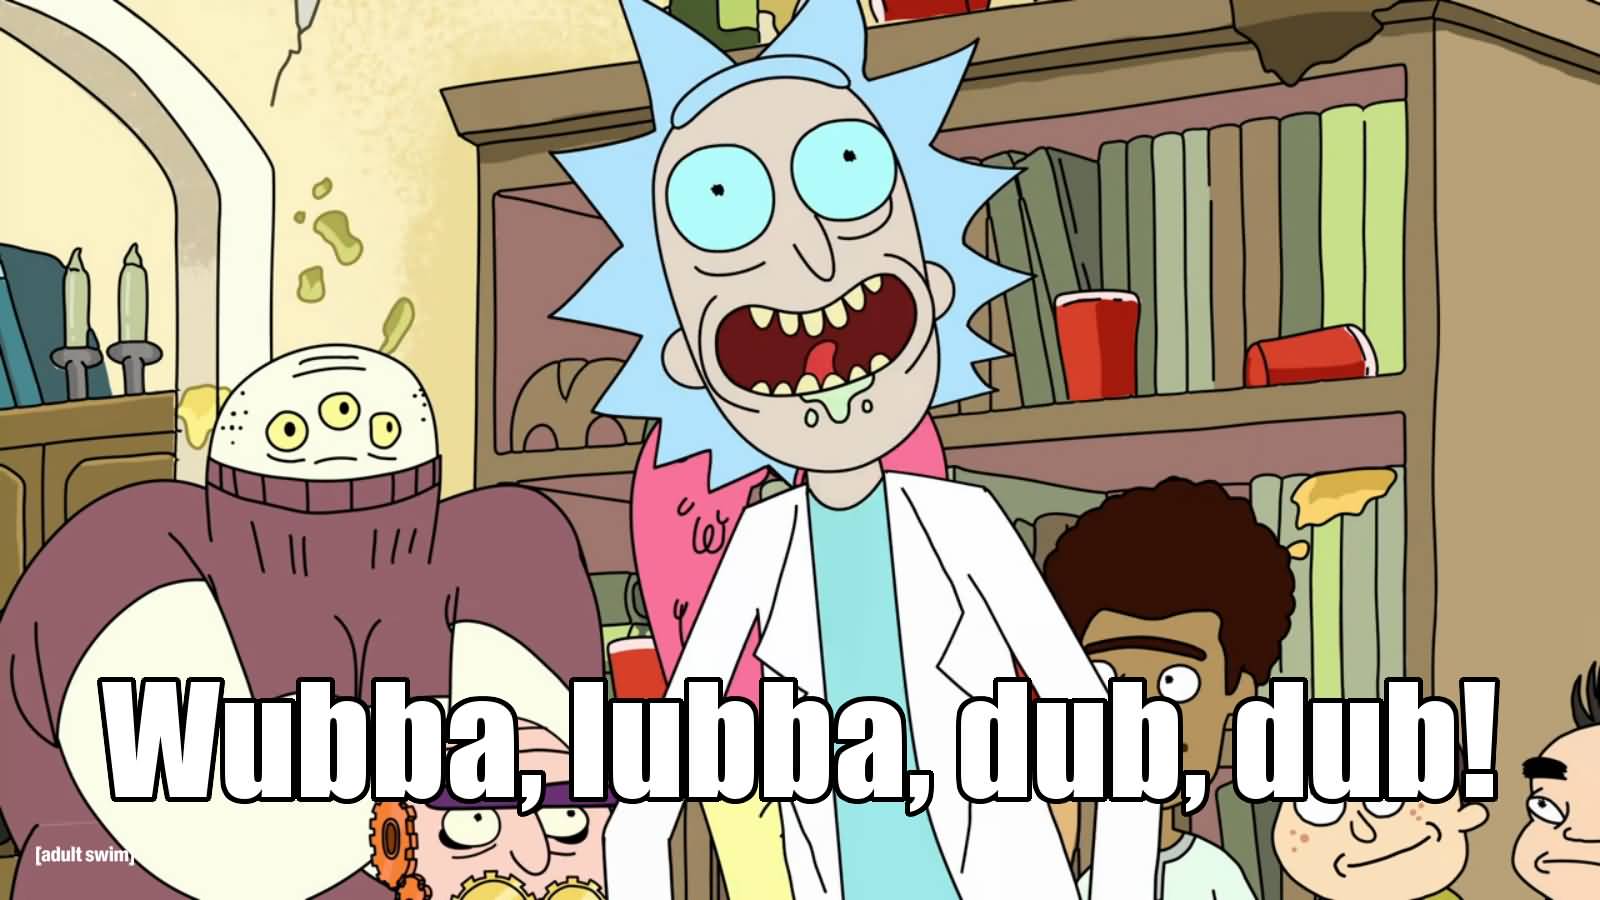 rick and morty quotes 21